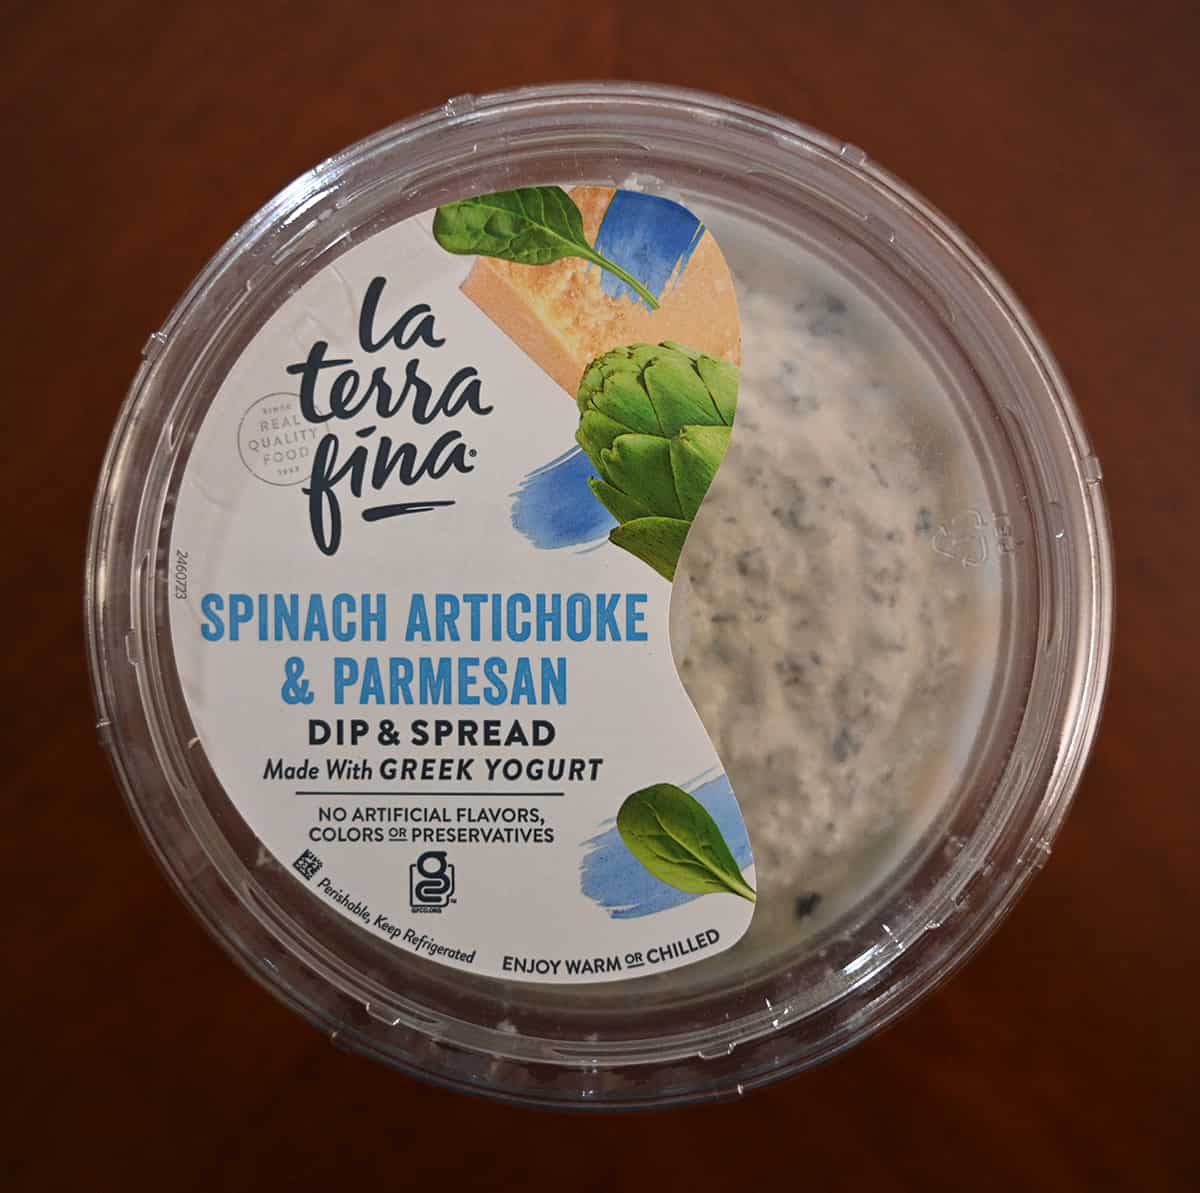 Top down image of the dip container lid showing that it has no artificial flavors, colors or preservatives.